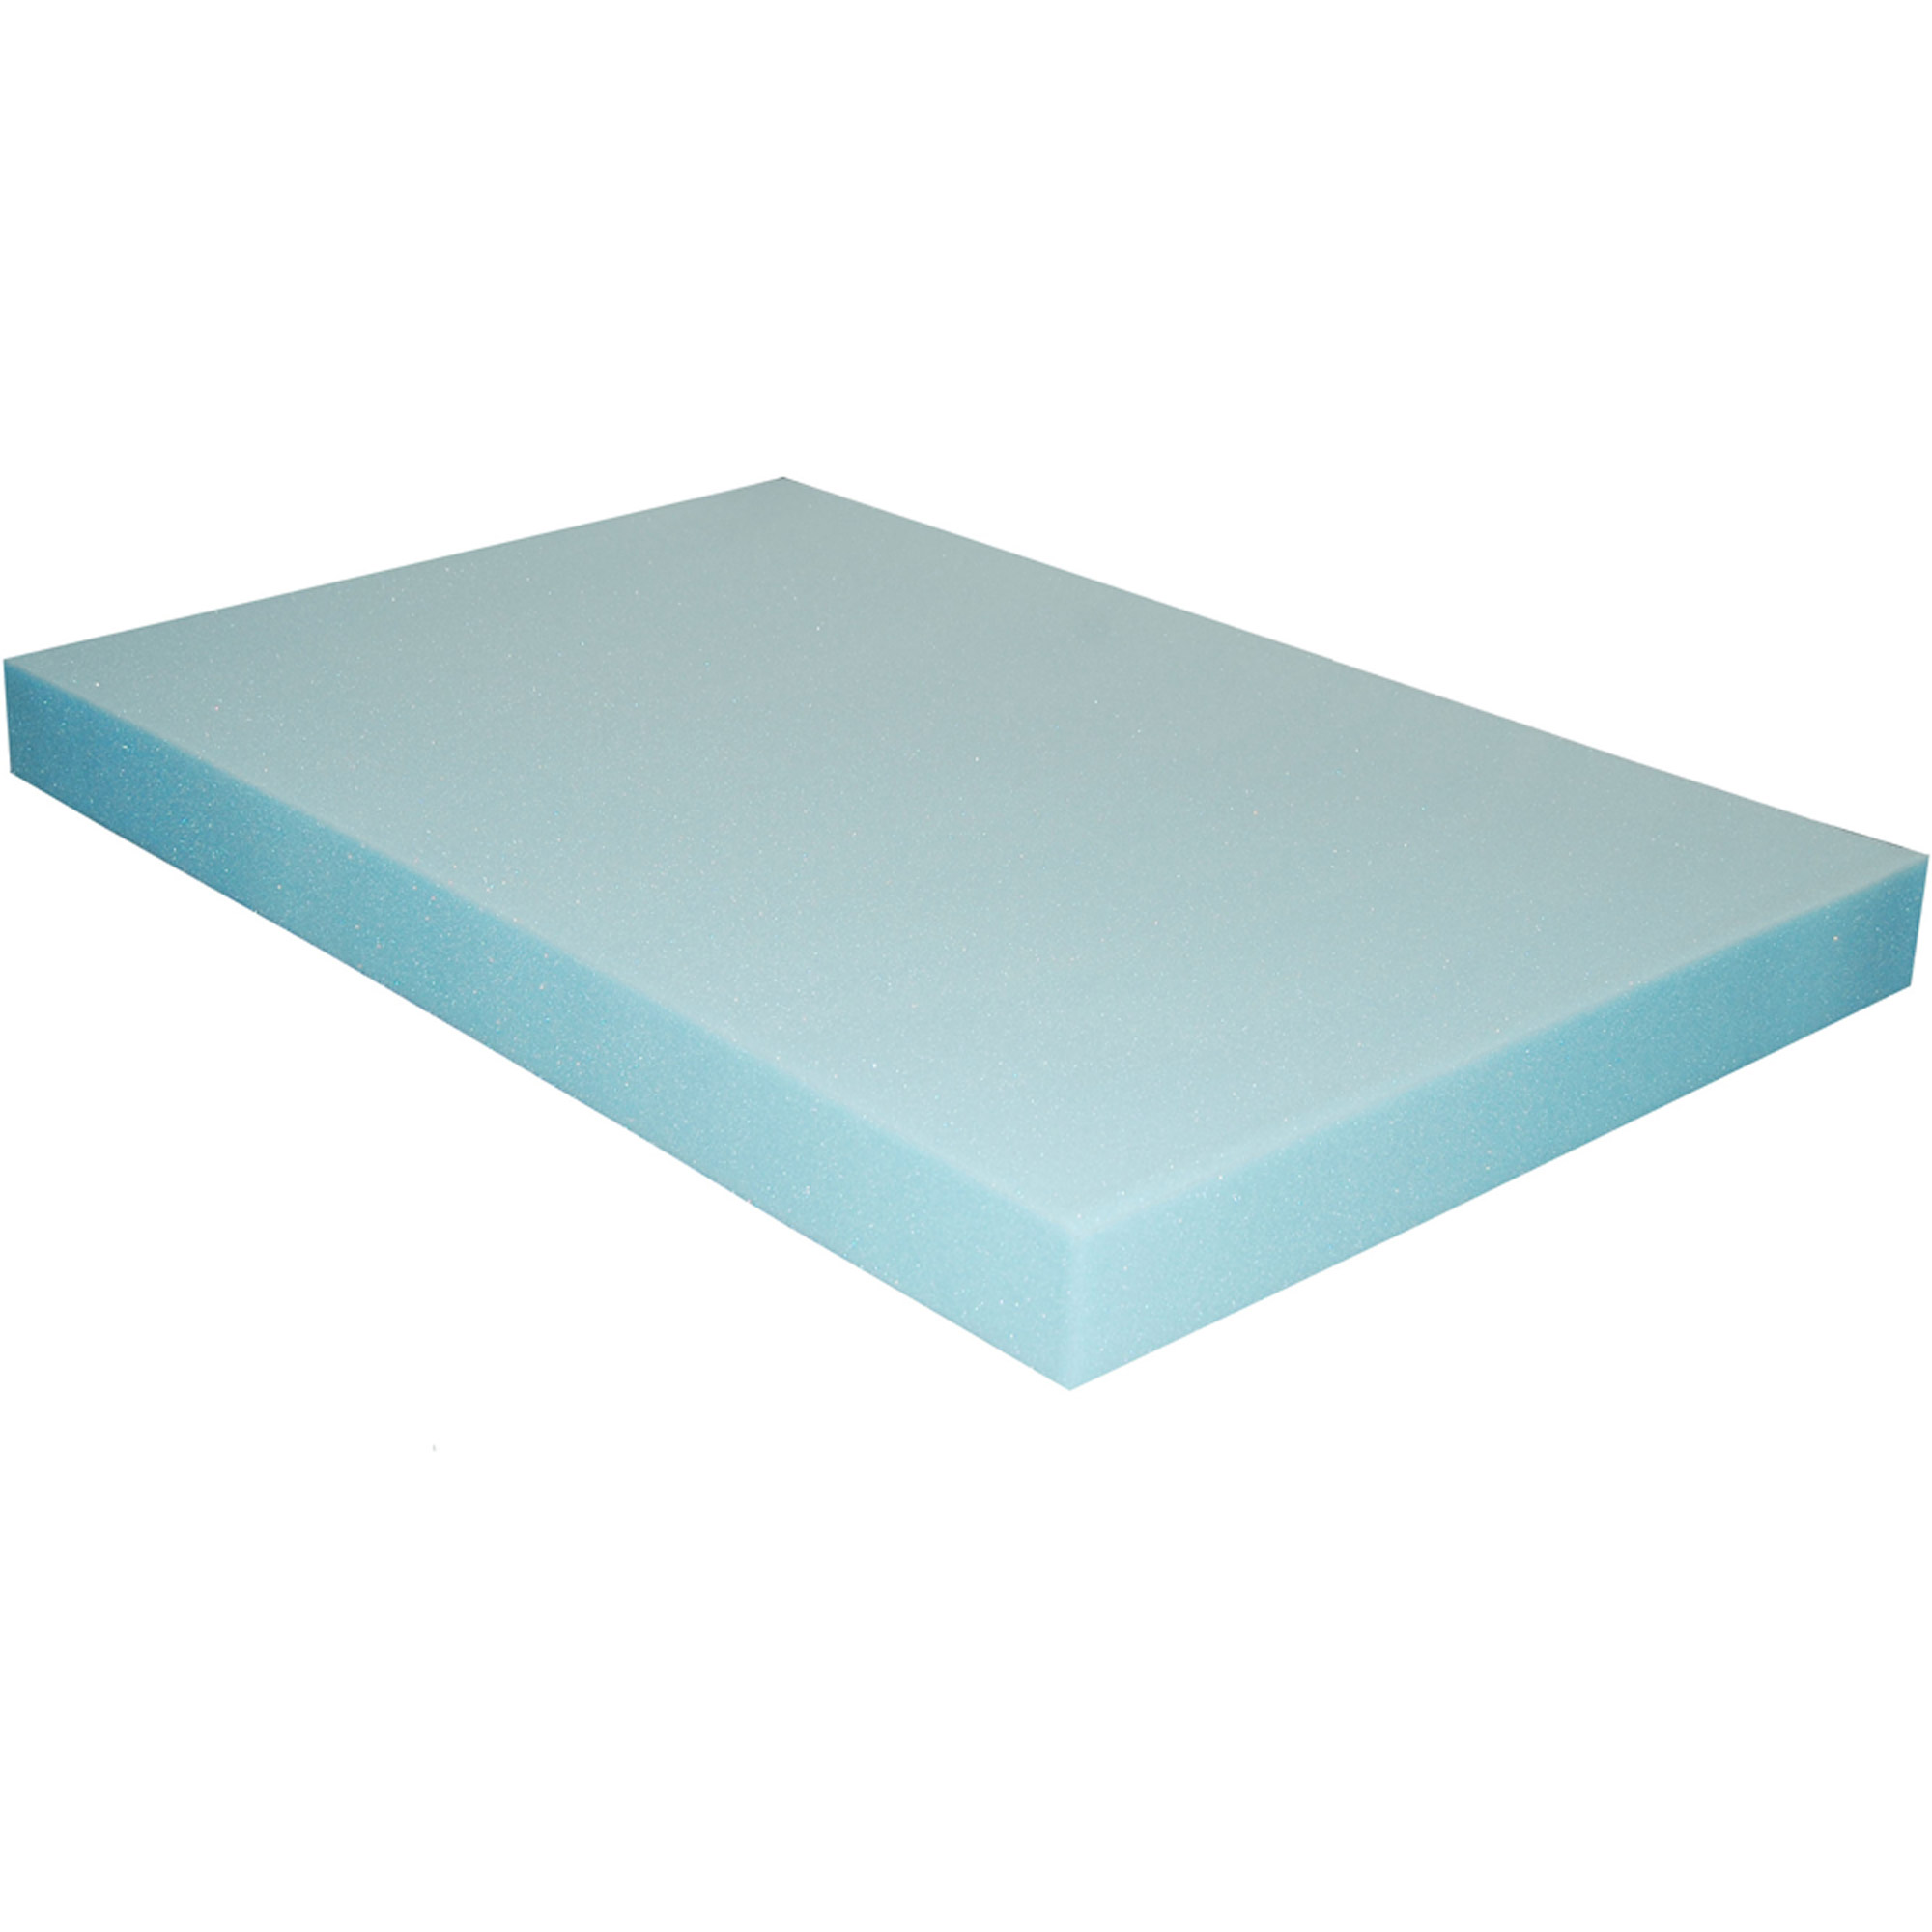 Morning Glory High Density Craft and Cushion Foam, 24" x 36" Rectangle x 3" Thick, 1 Each. Blue - image 1 of 3